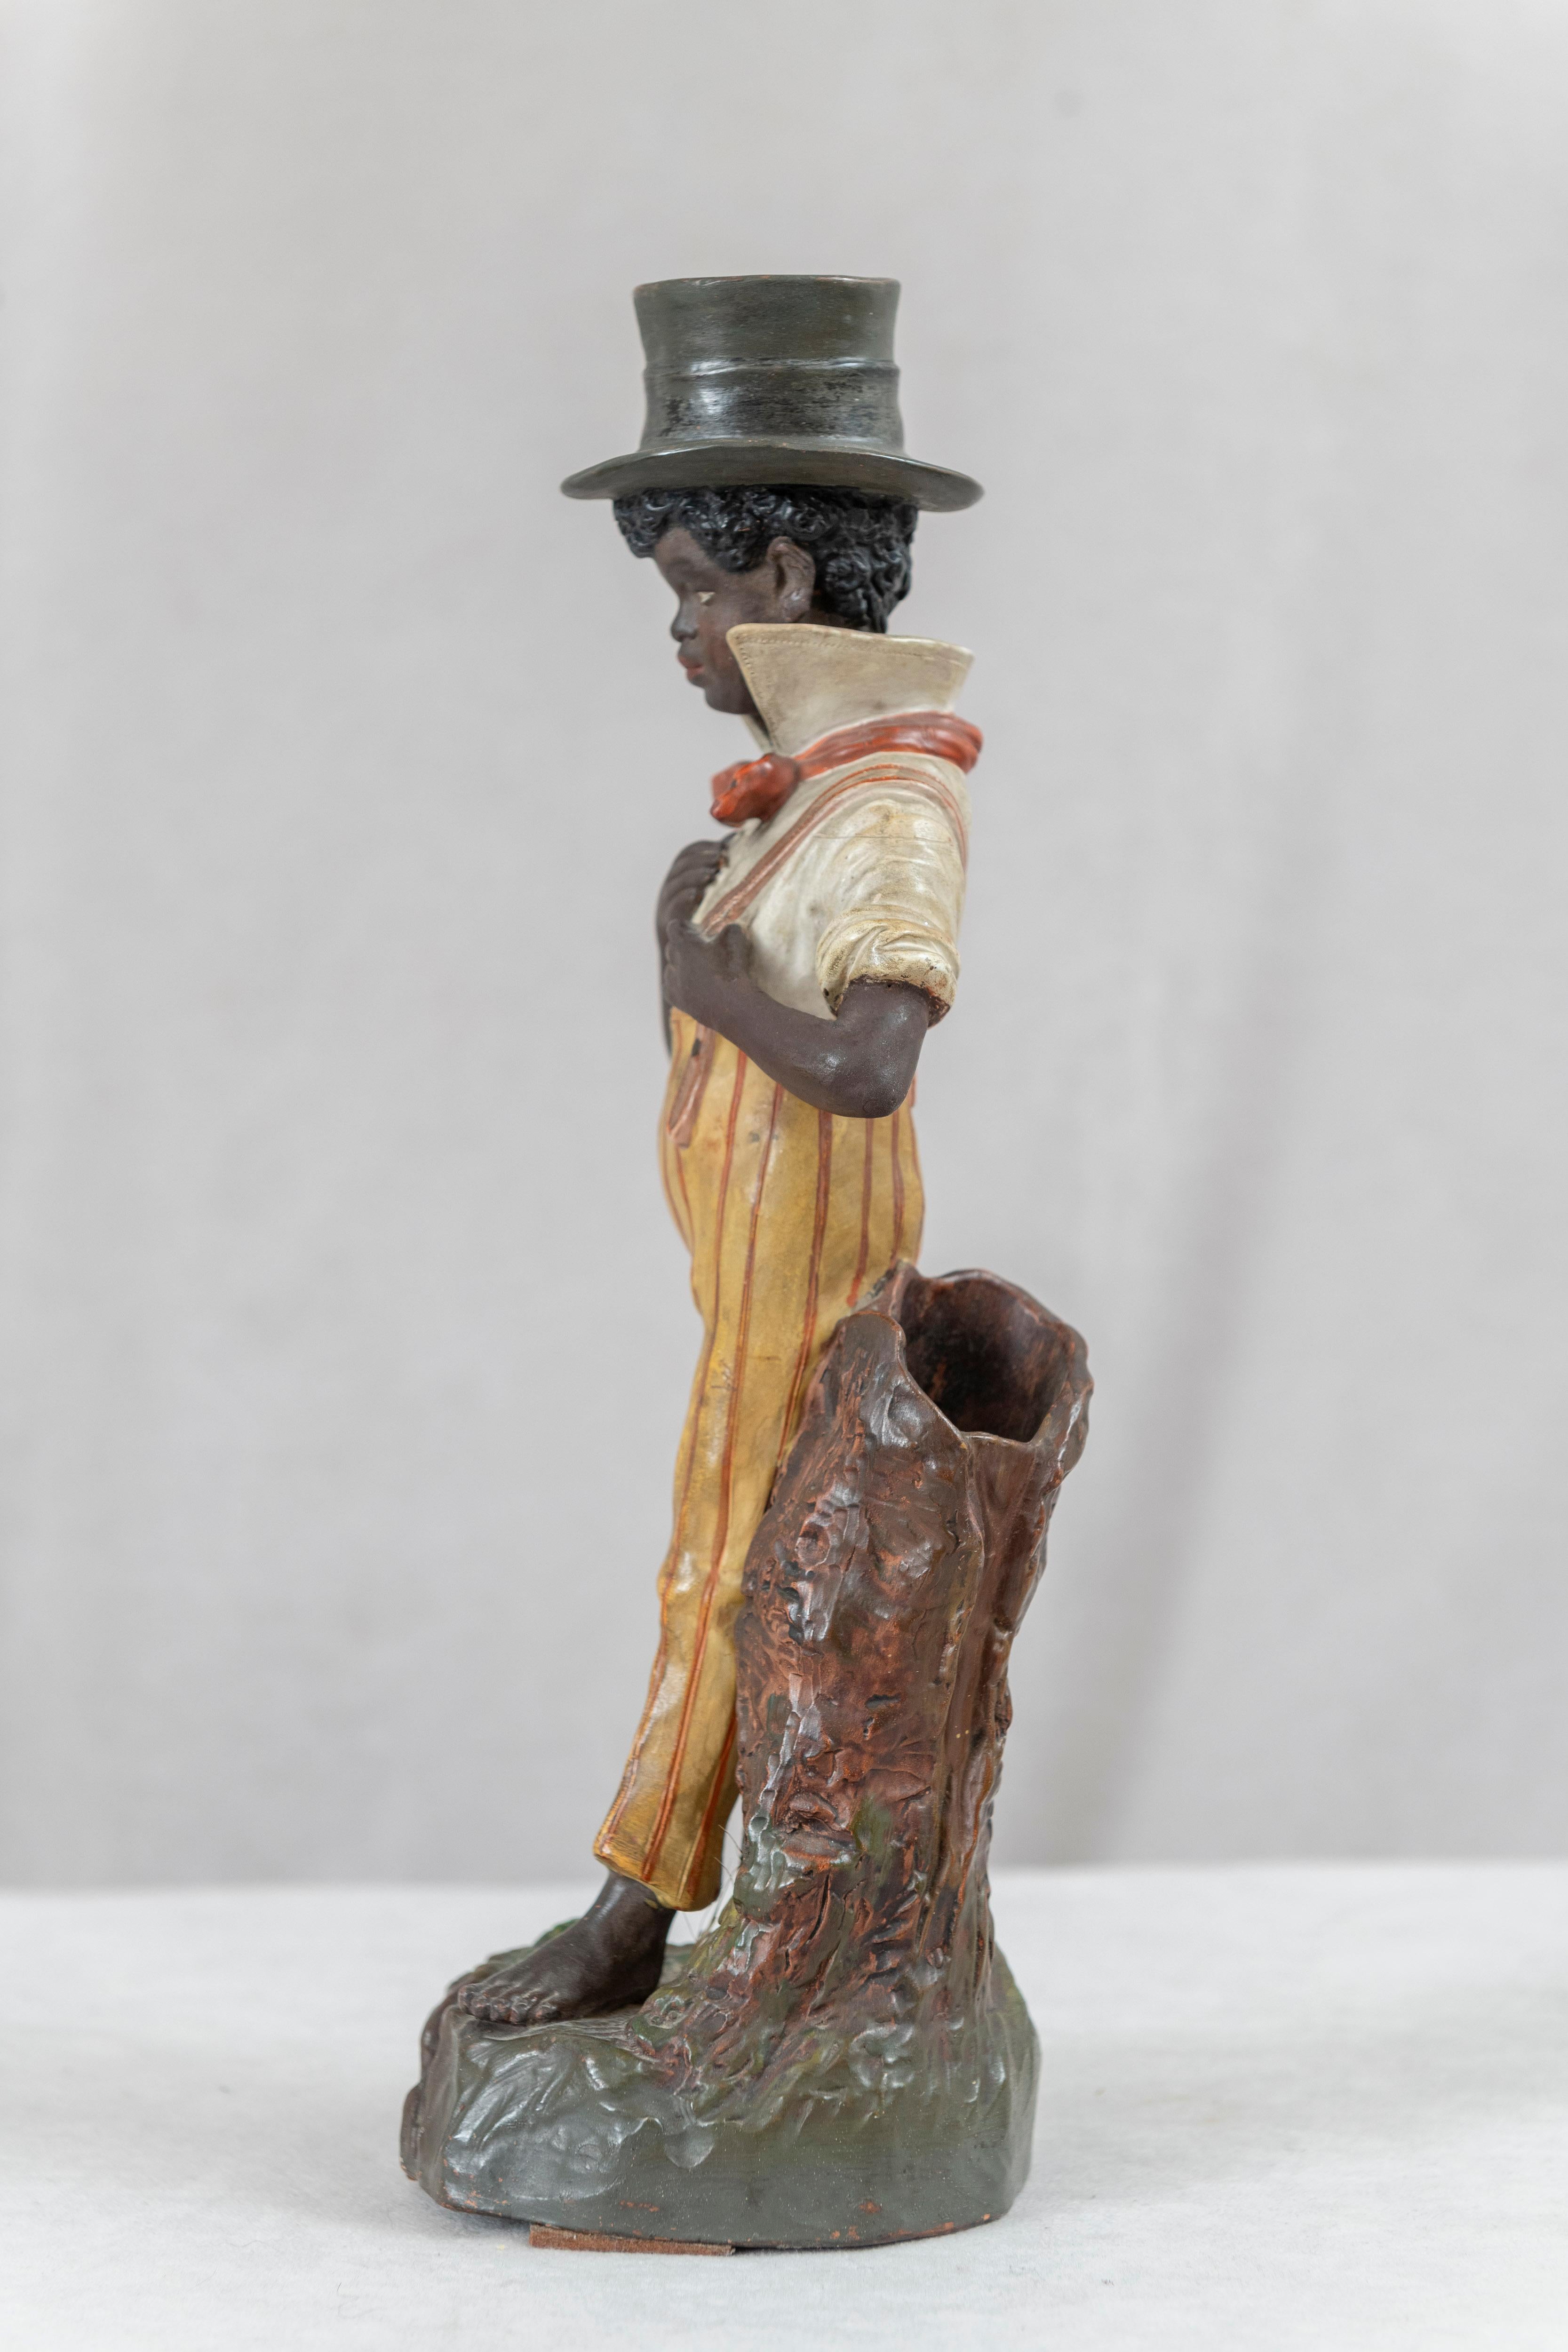 Austrian Painted Figure of a African American Boy, Signed Bernhard Bloch ca 1900 In Good Condition For Sale In Petaluma, CA